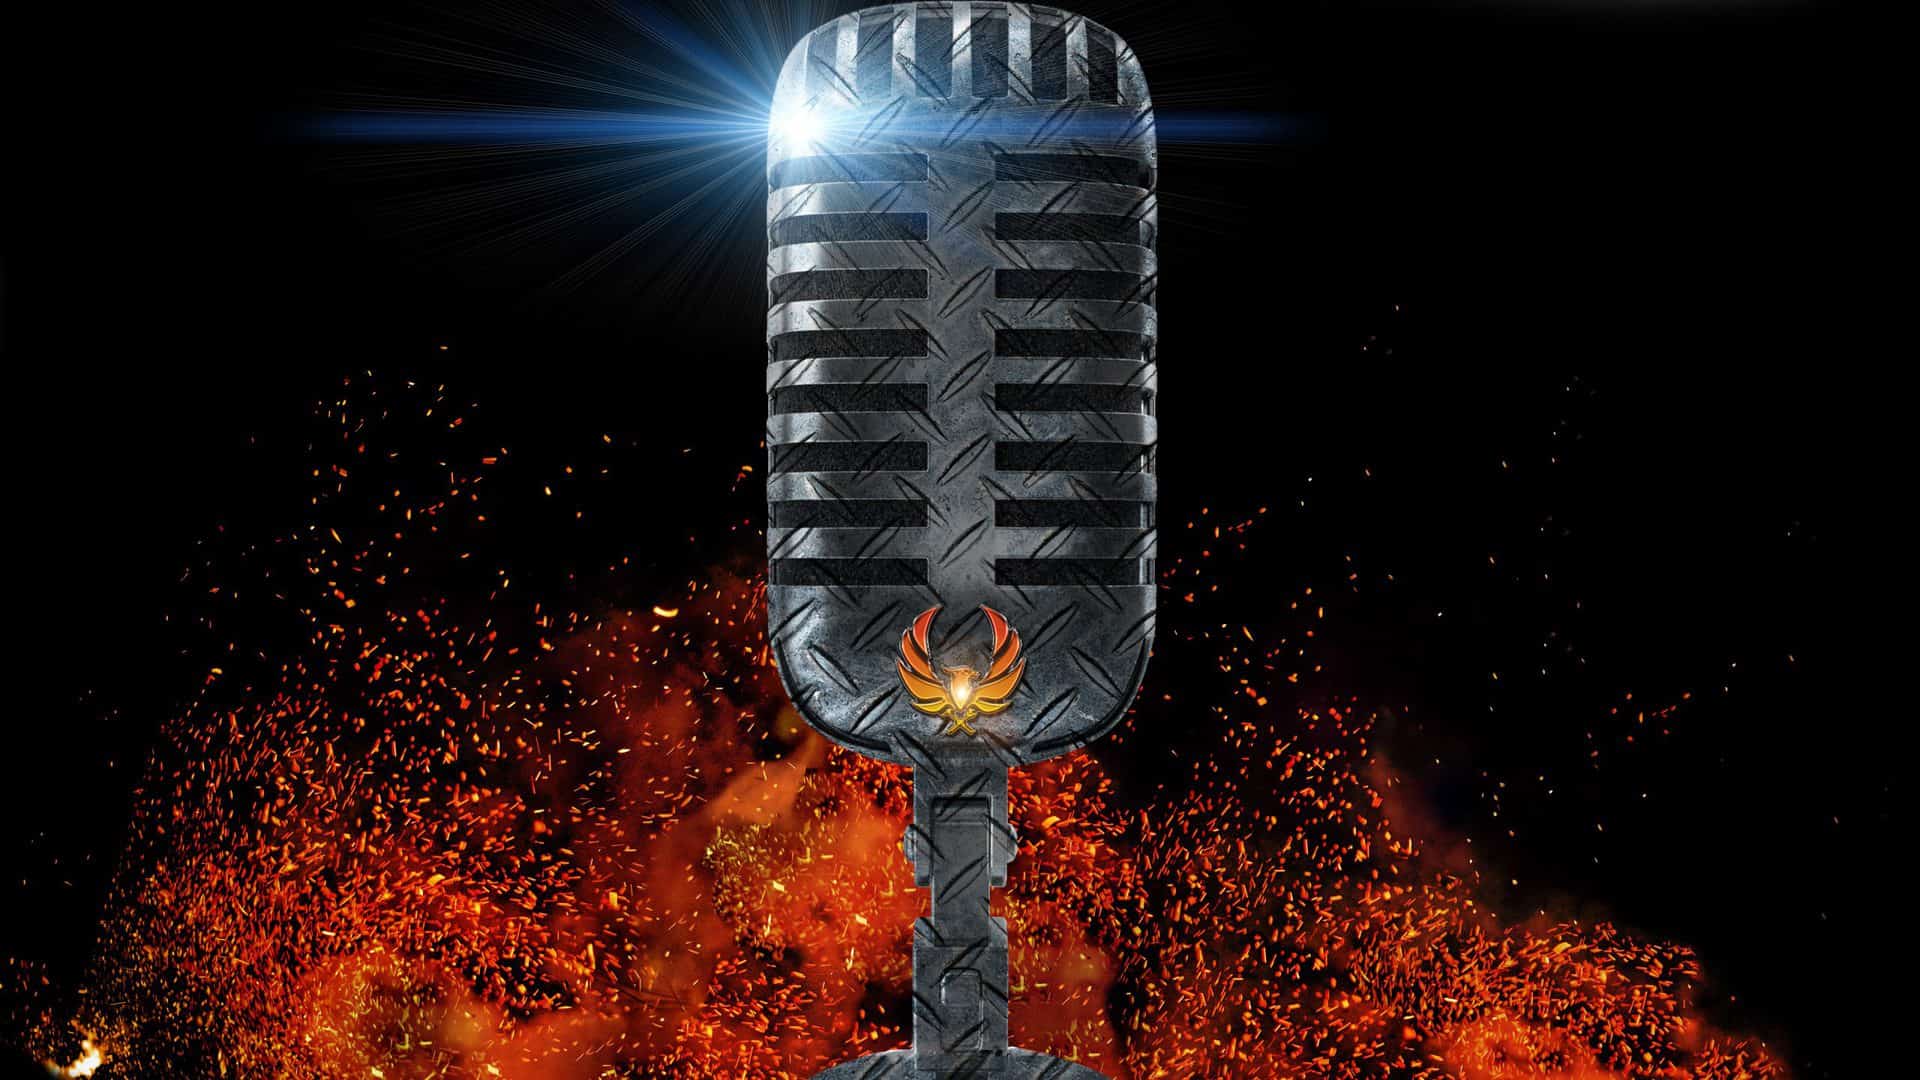 Podcast microphone image